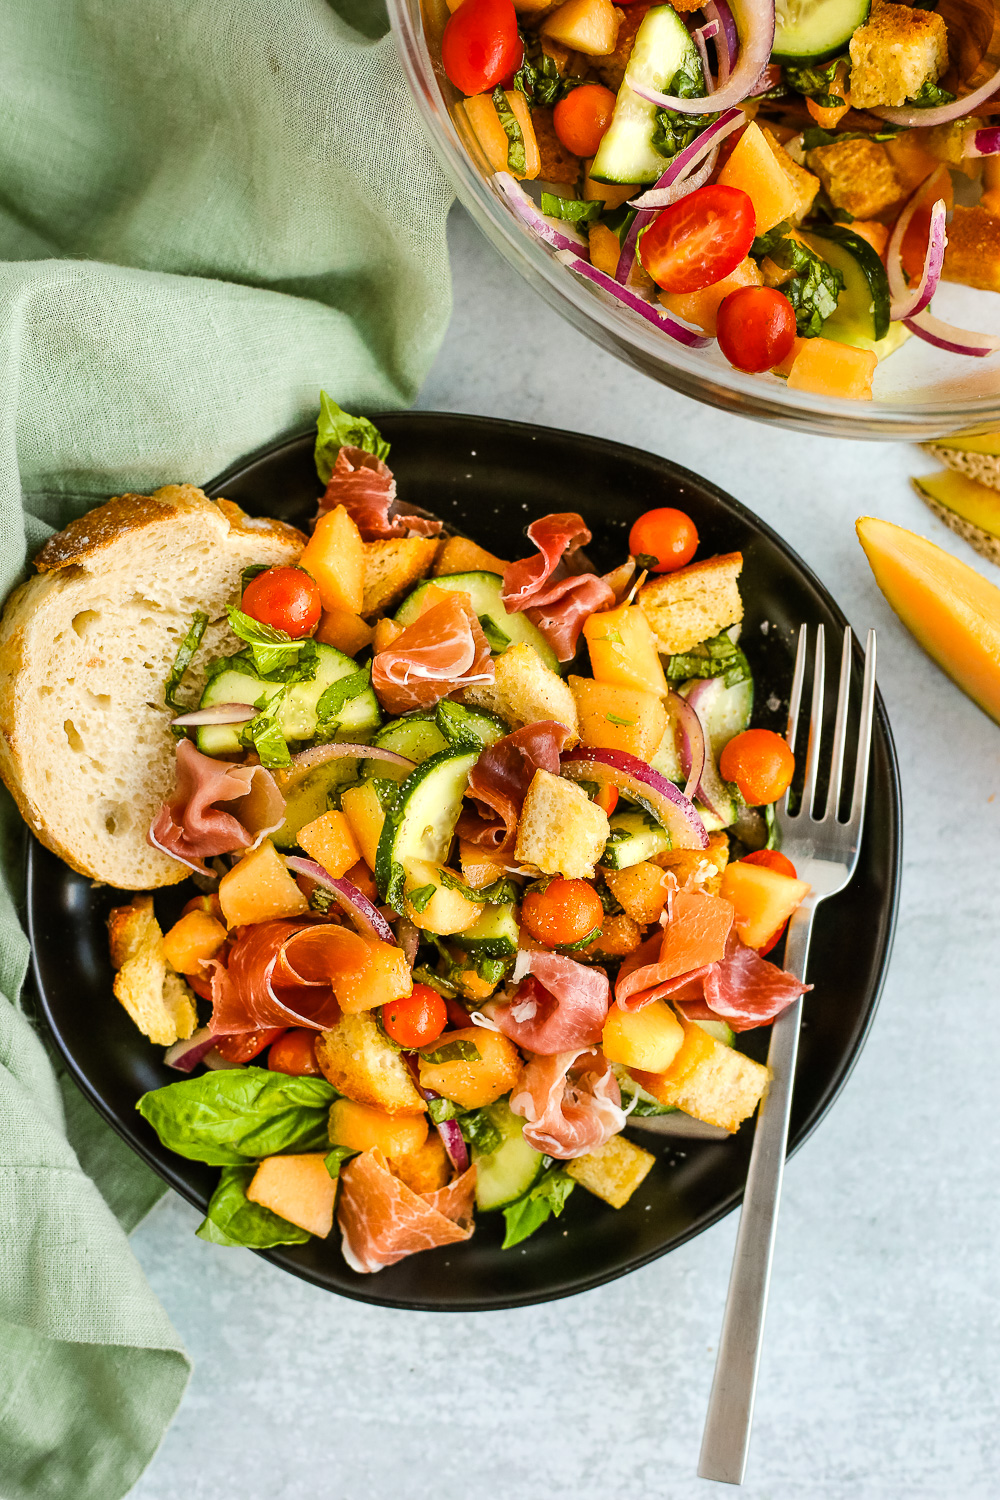 Overhead view of the styled Summer Panzanella Salad with Cantaloupe and Prosciutto recipe, served on a black ceramic plate with a silver fork